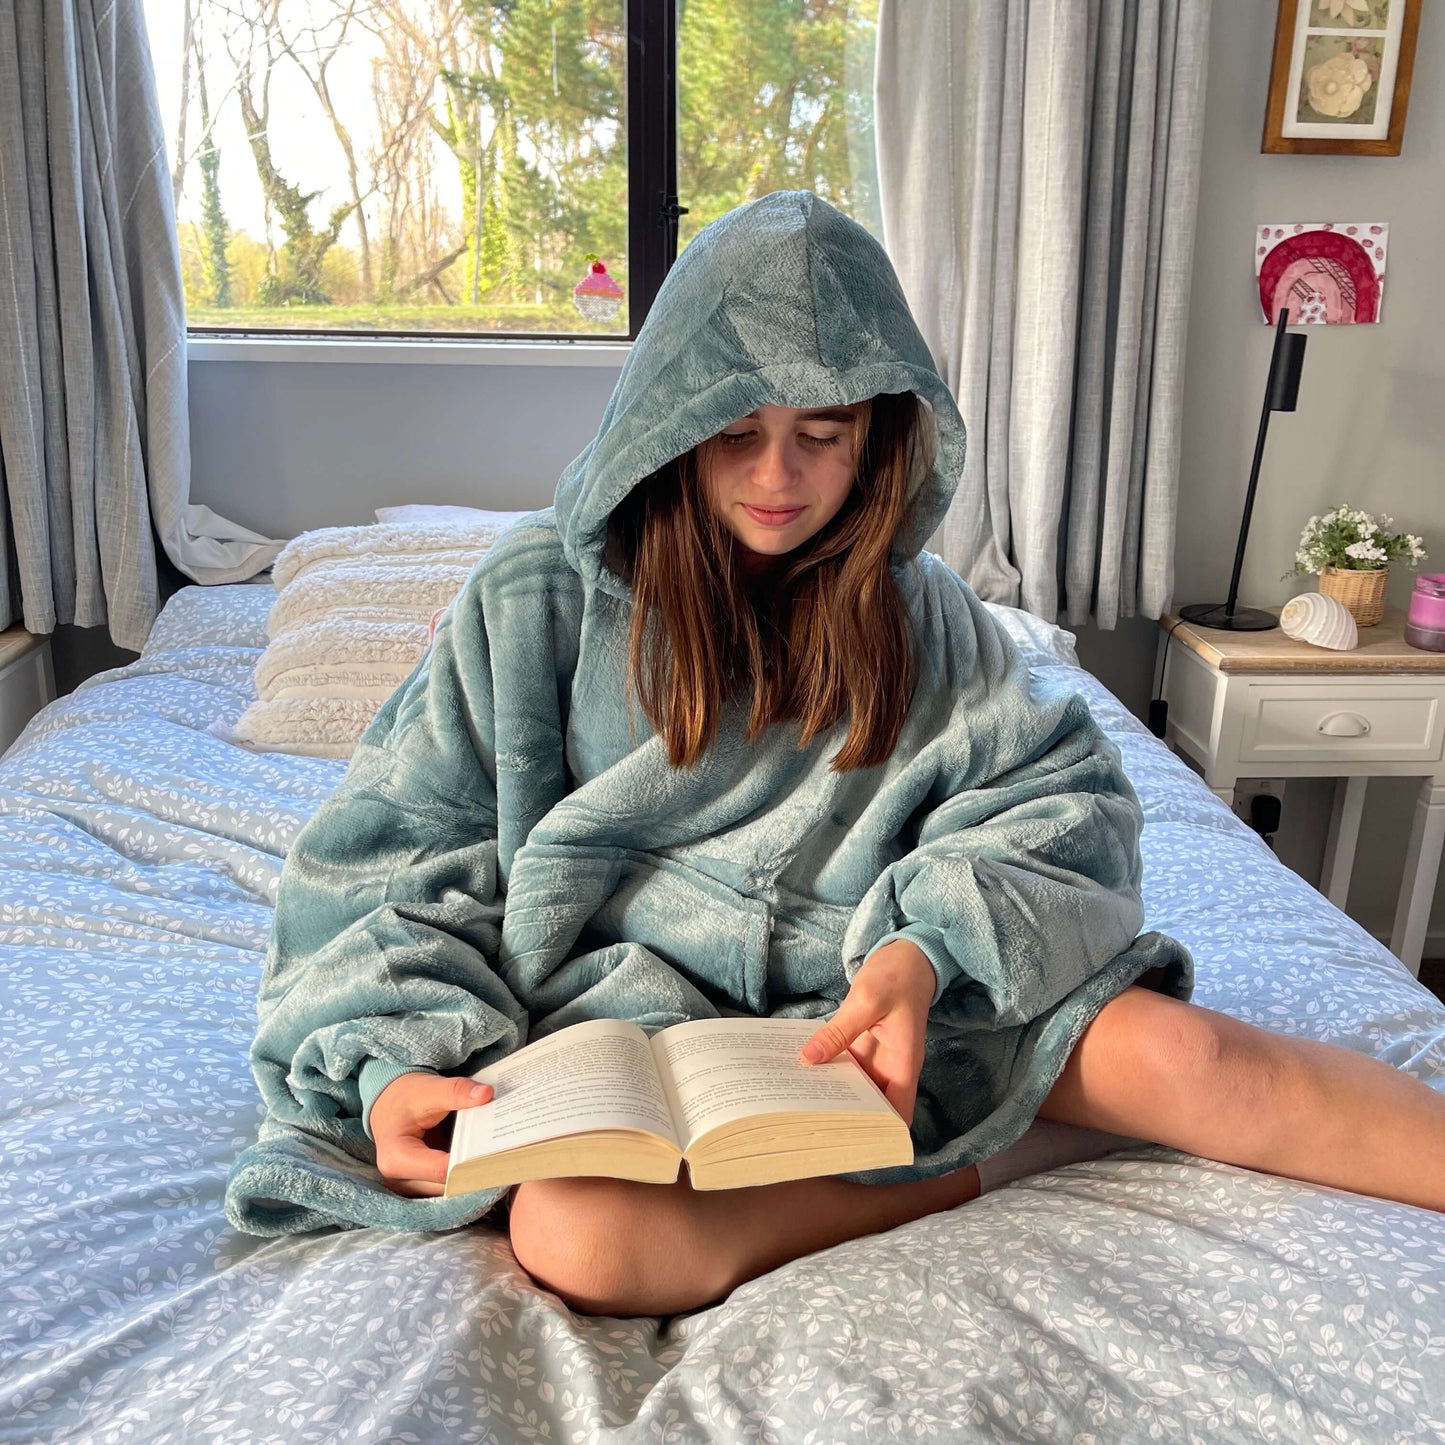 Girl sitting on a bed reading a book wearing an oversized blue hoodie.